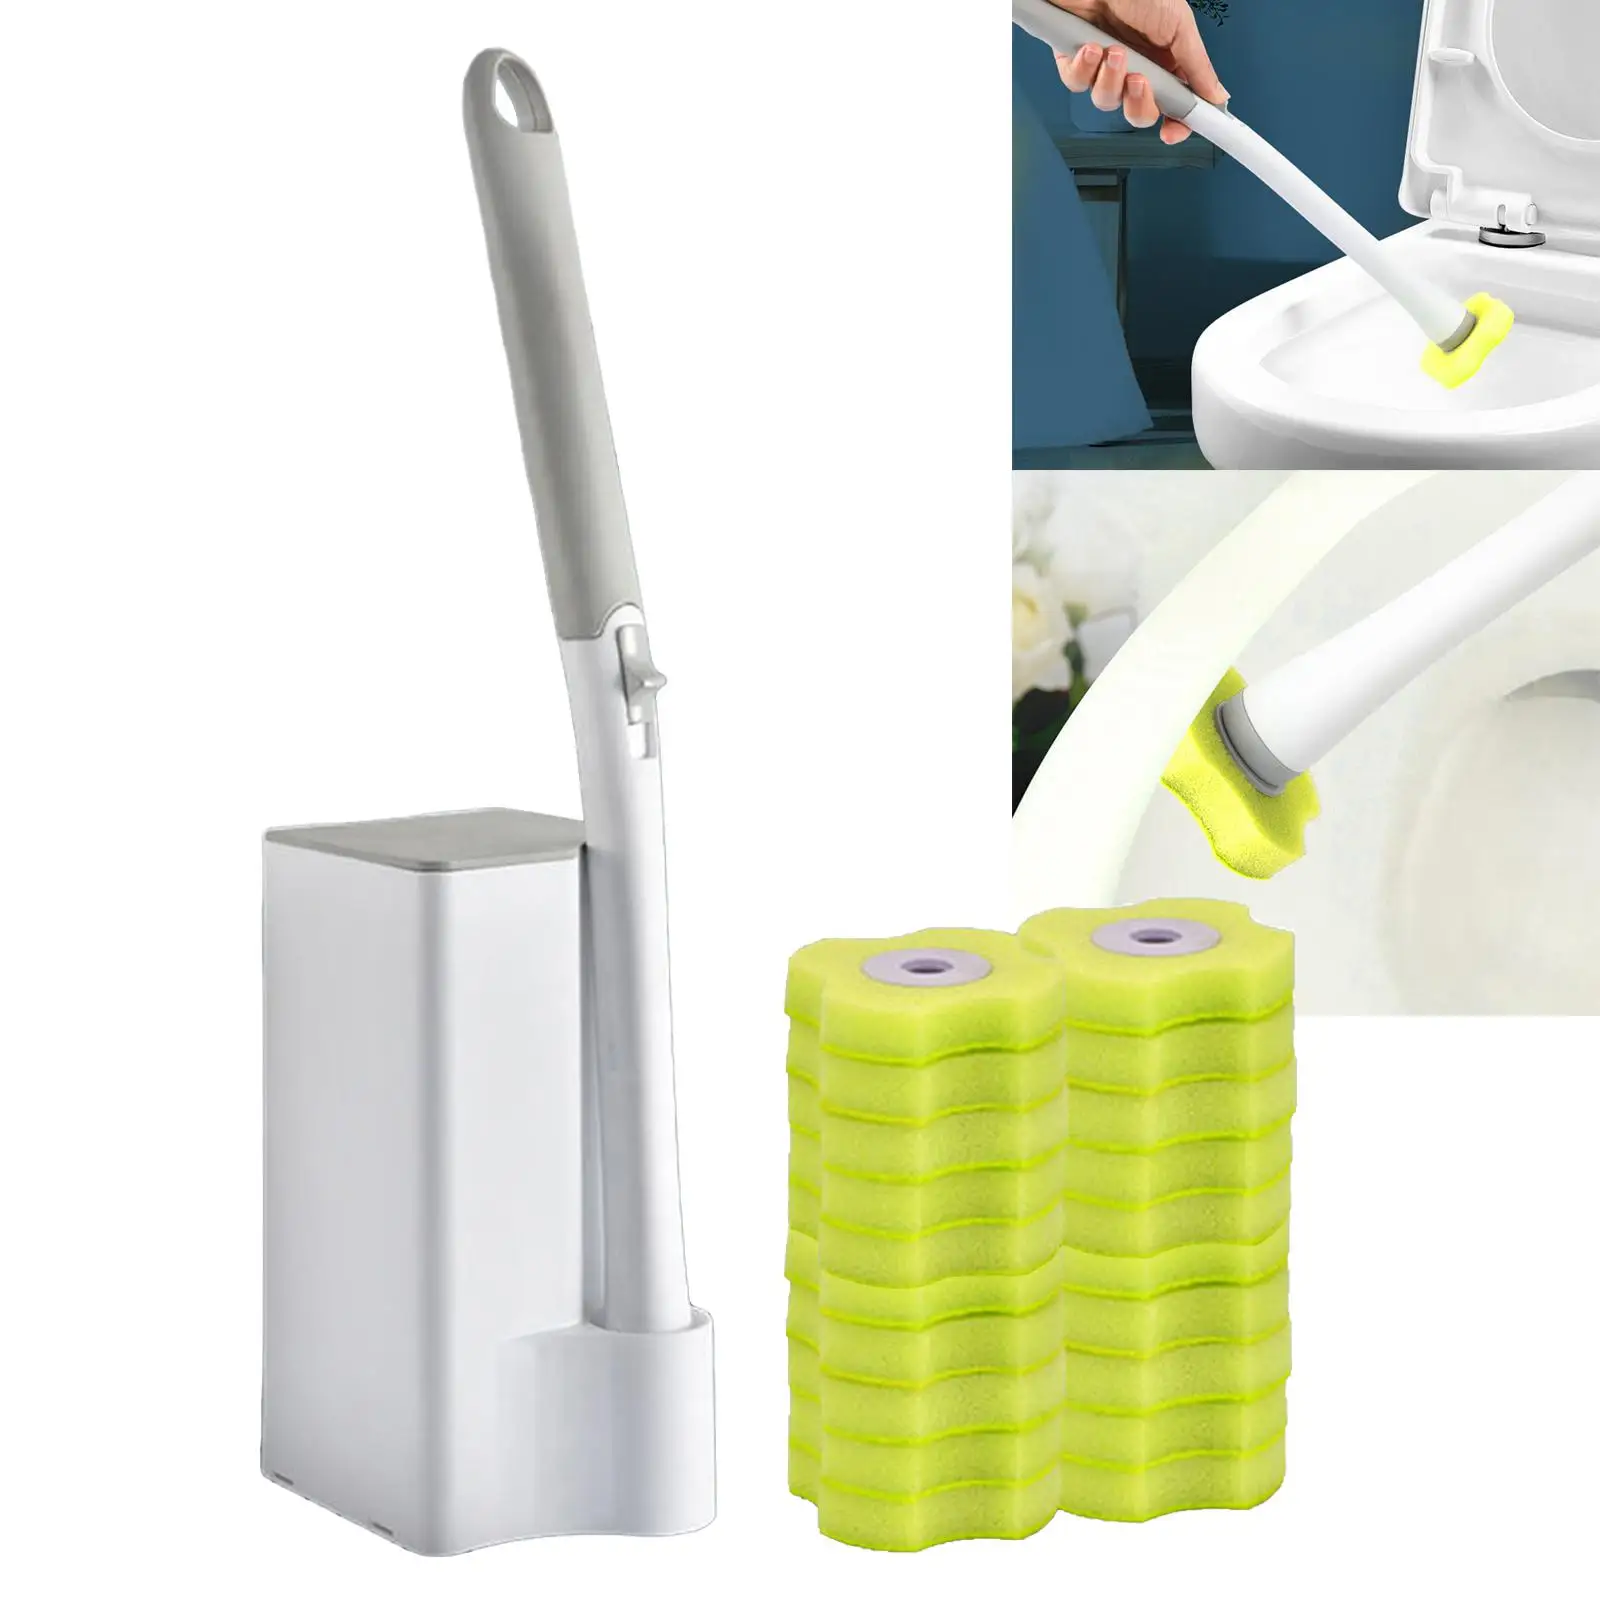 Disposable Toilet Brush Cleaning Liquid Cleaning Kit Scrubber Toilet Bowl Wand Cleaner Bathroom Accessories